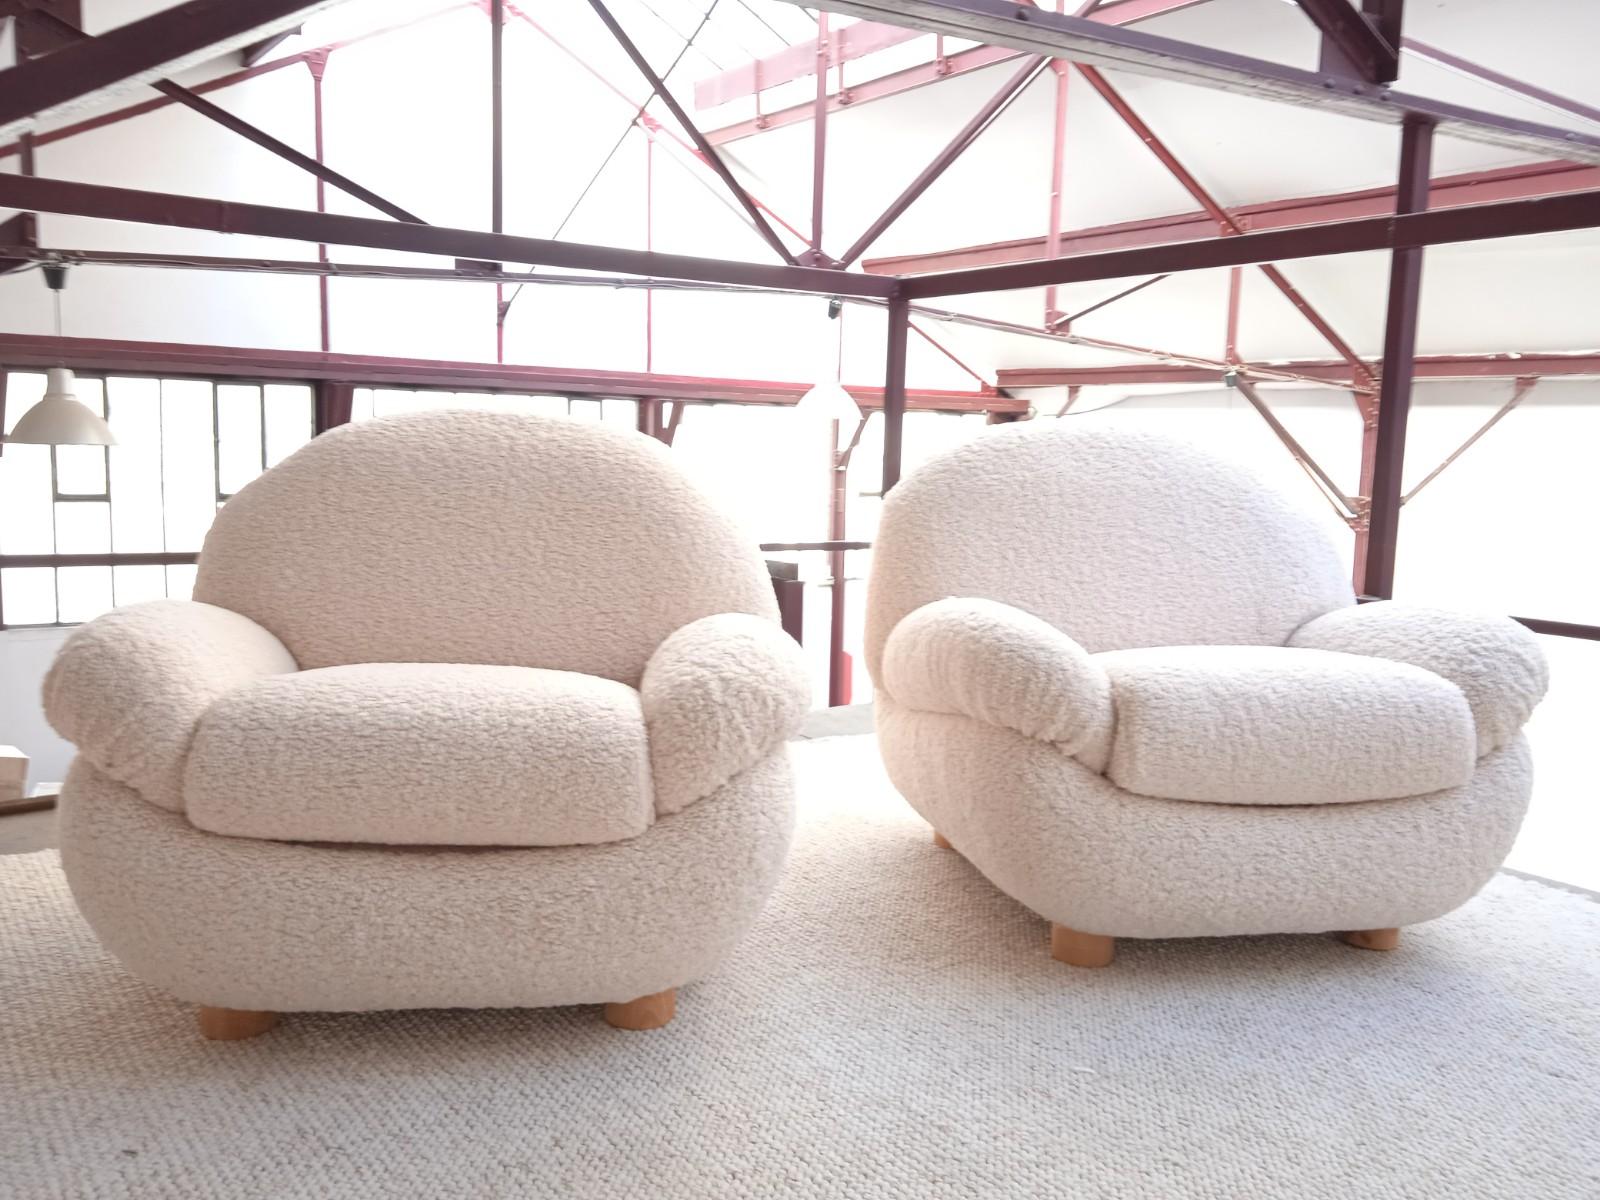 Pair of 70s Italian Pacha lounge chairs, fully upholstered in Shearling style.
Organic shapes and full of roundness give a lot of comfort and elegance to these armchairs.